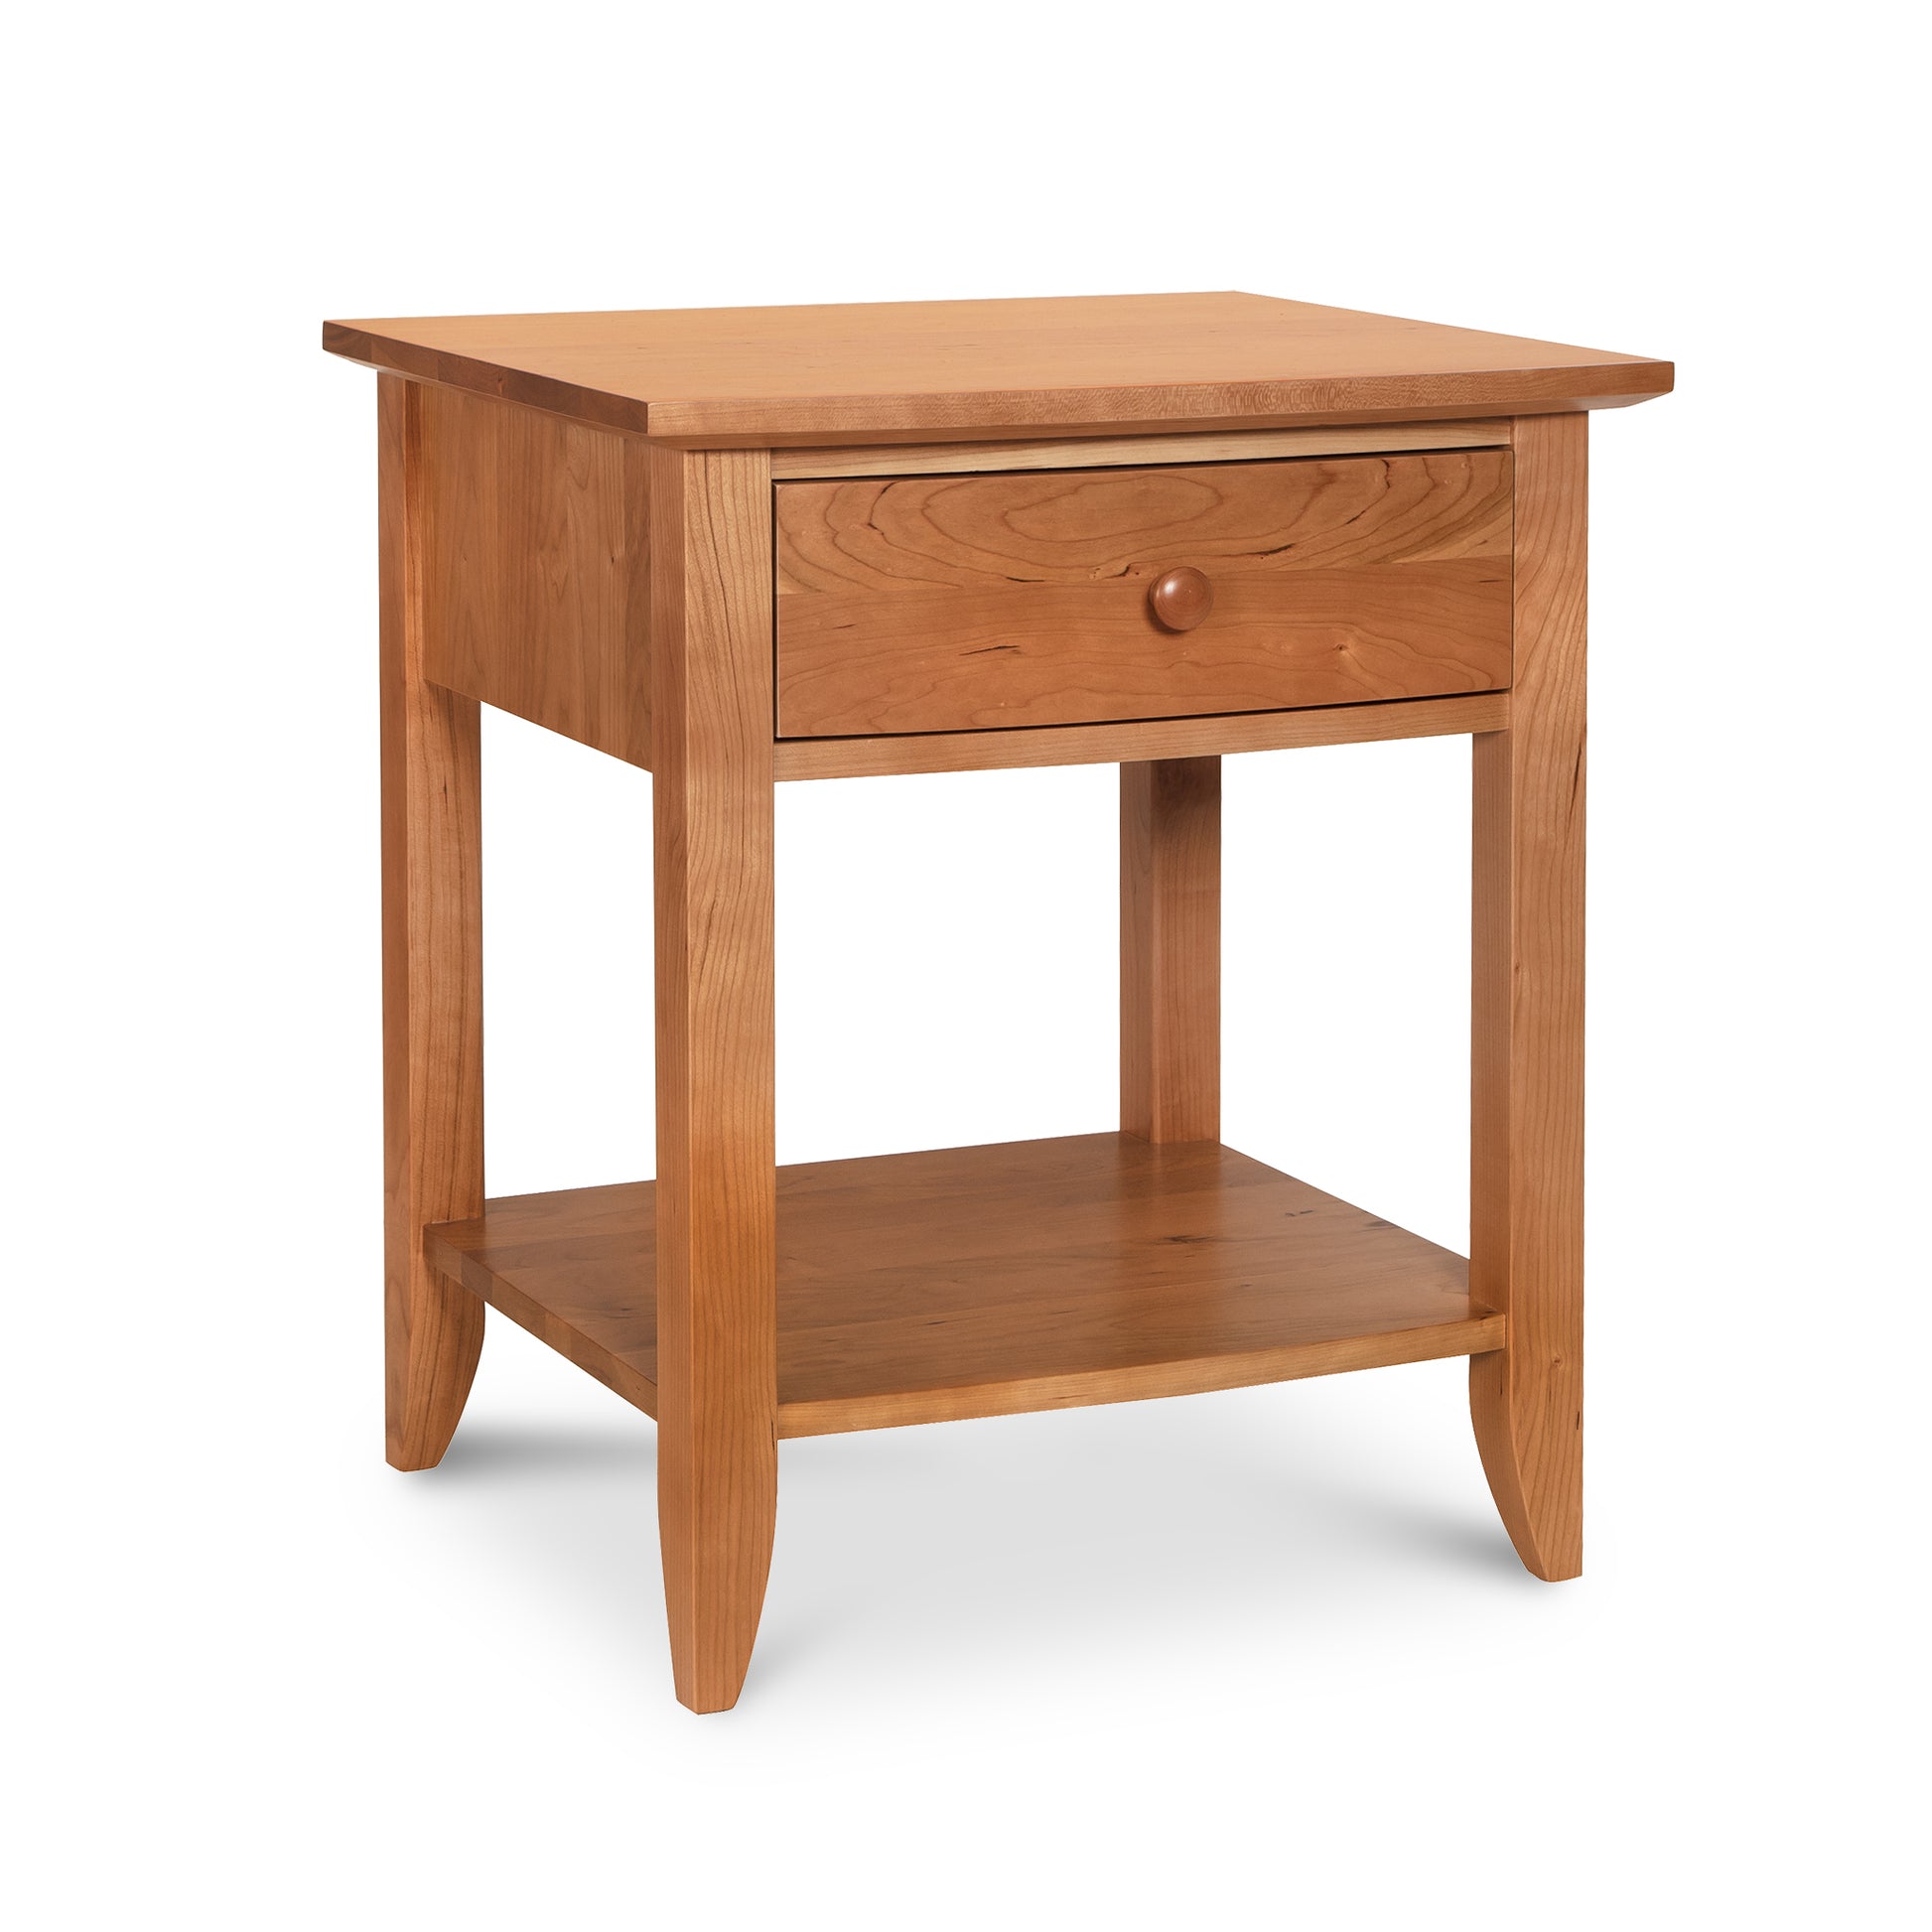 A Lyndon Furniture Bow Front 1-Drawer Open Shelf Nightstand with a drawer on top.